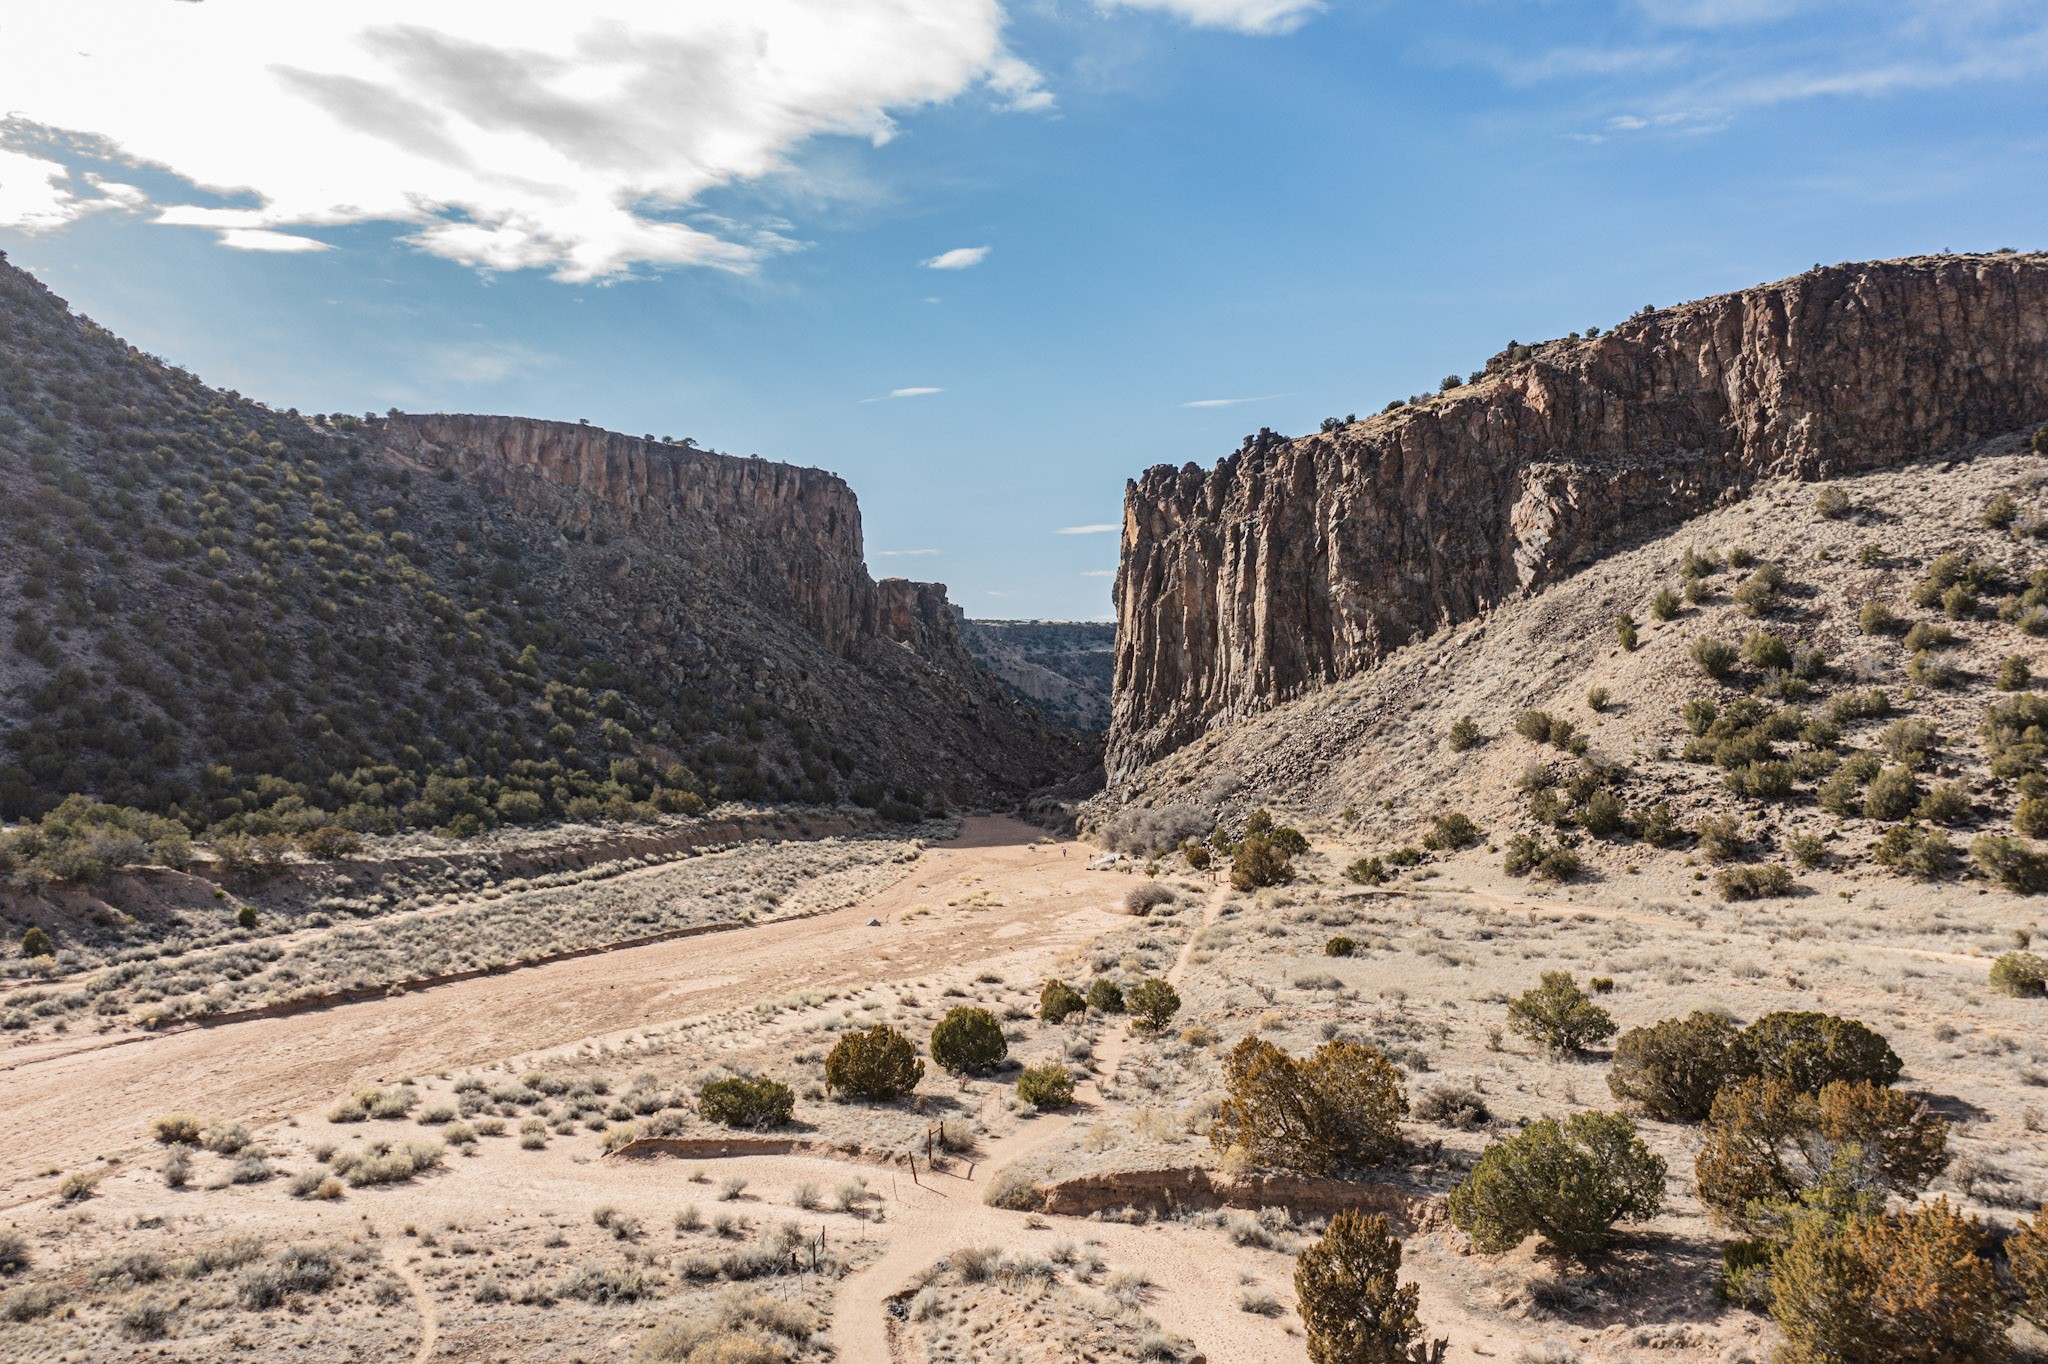 1.5 miles down the road, Diablo Canyon recreation area - - - a hotspot for outdoor recreation including hiking, rock climbing, and river rafting.